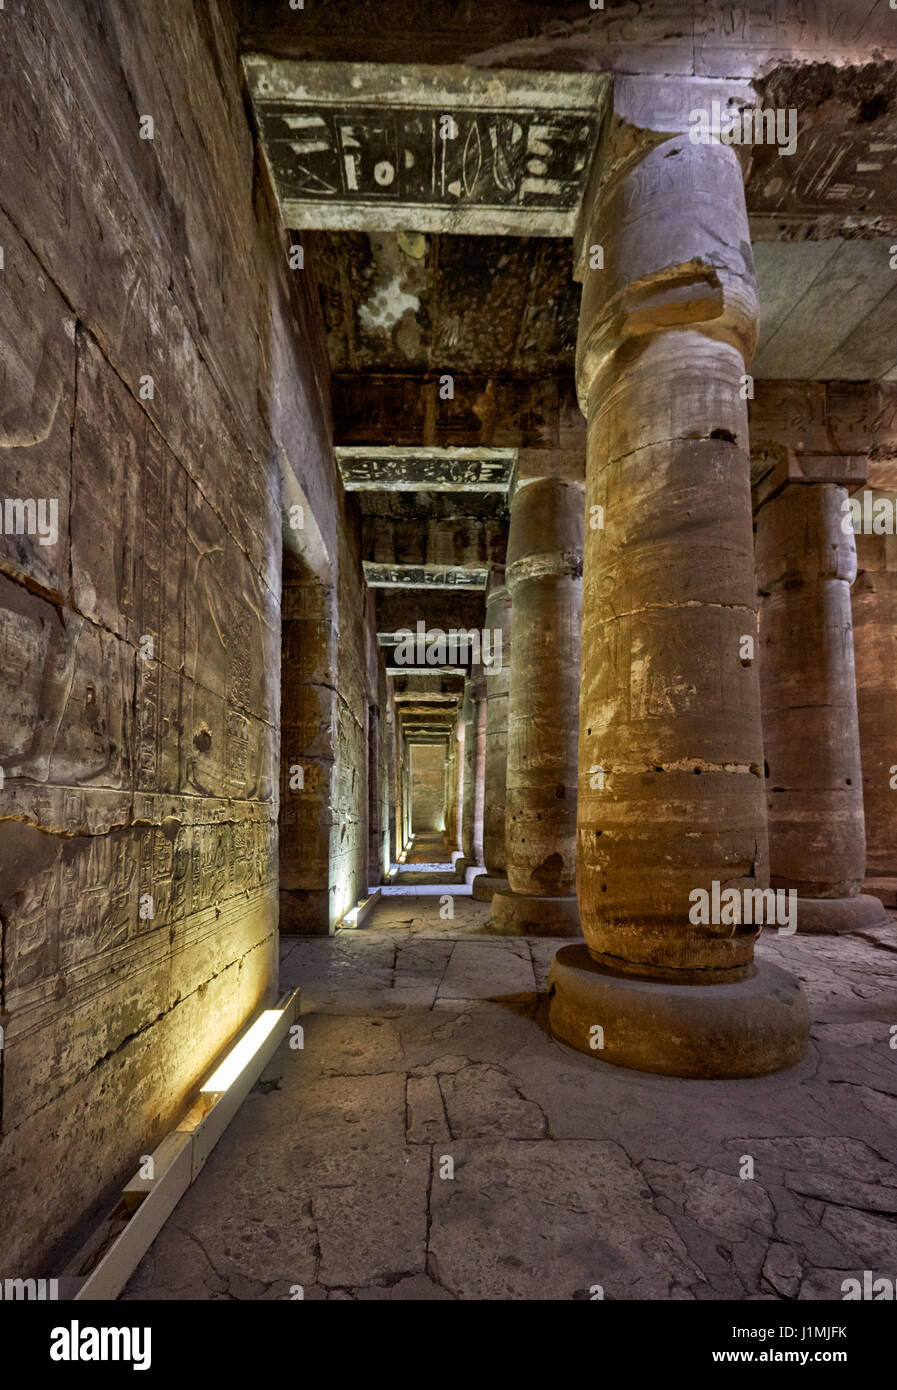 Second Hypostyle Hall with papyrus cluster columns inside Temple of Seti I , Abydos, Egypt, Africa Stock Photo